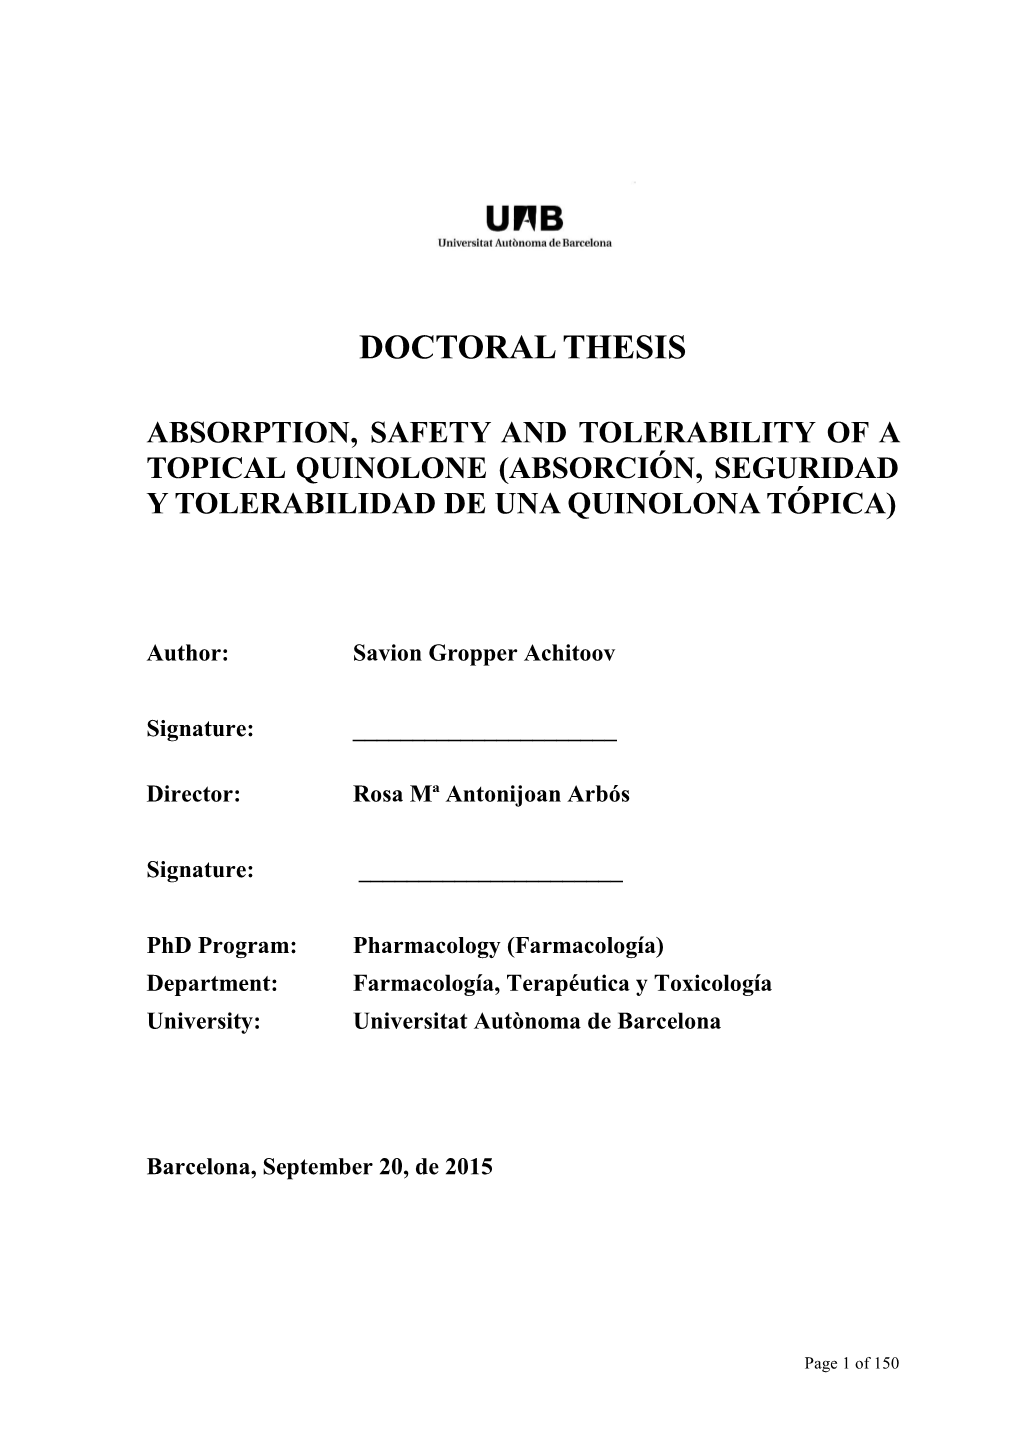 Doctoral Thesis Absorption, Safety and Tolerability of a Topical Quinolone